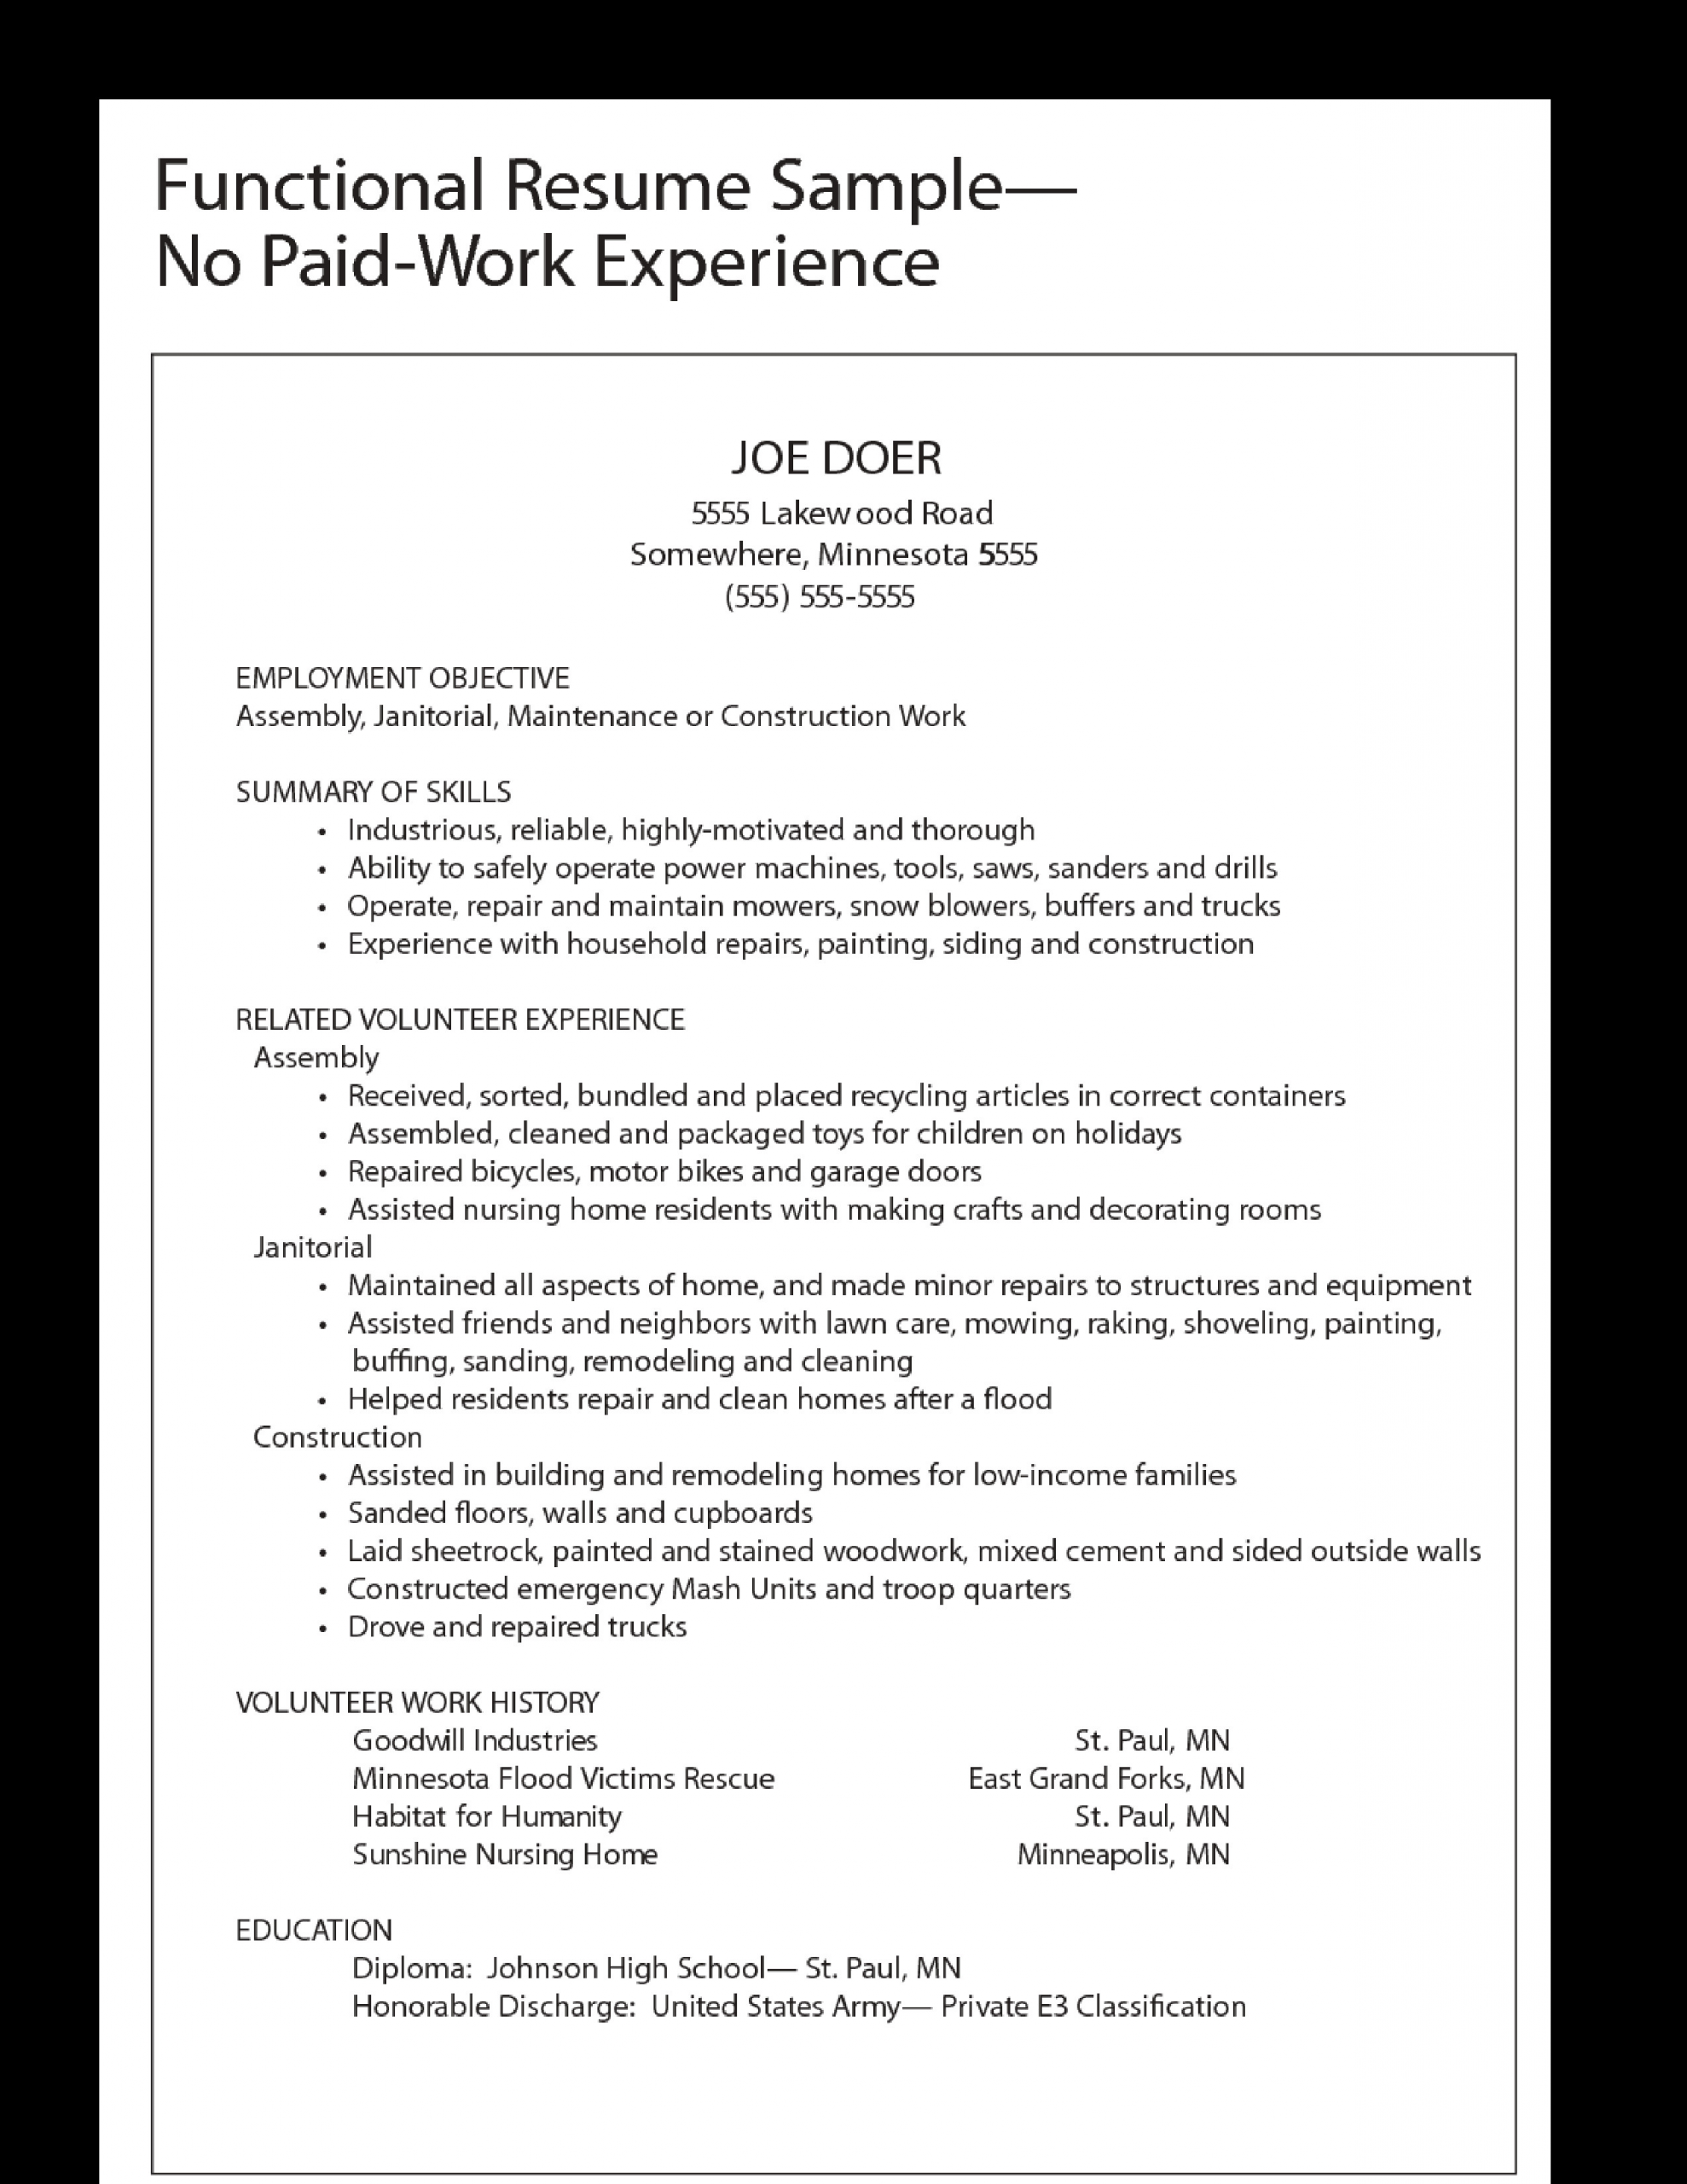 Sample Resume for someone with Little Job Experience Functional Work Experience Resume Sample